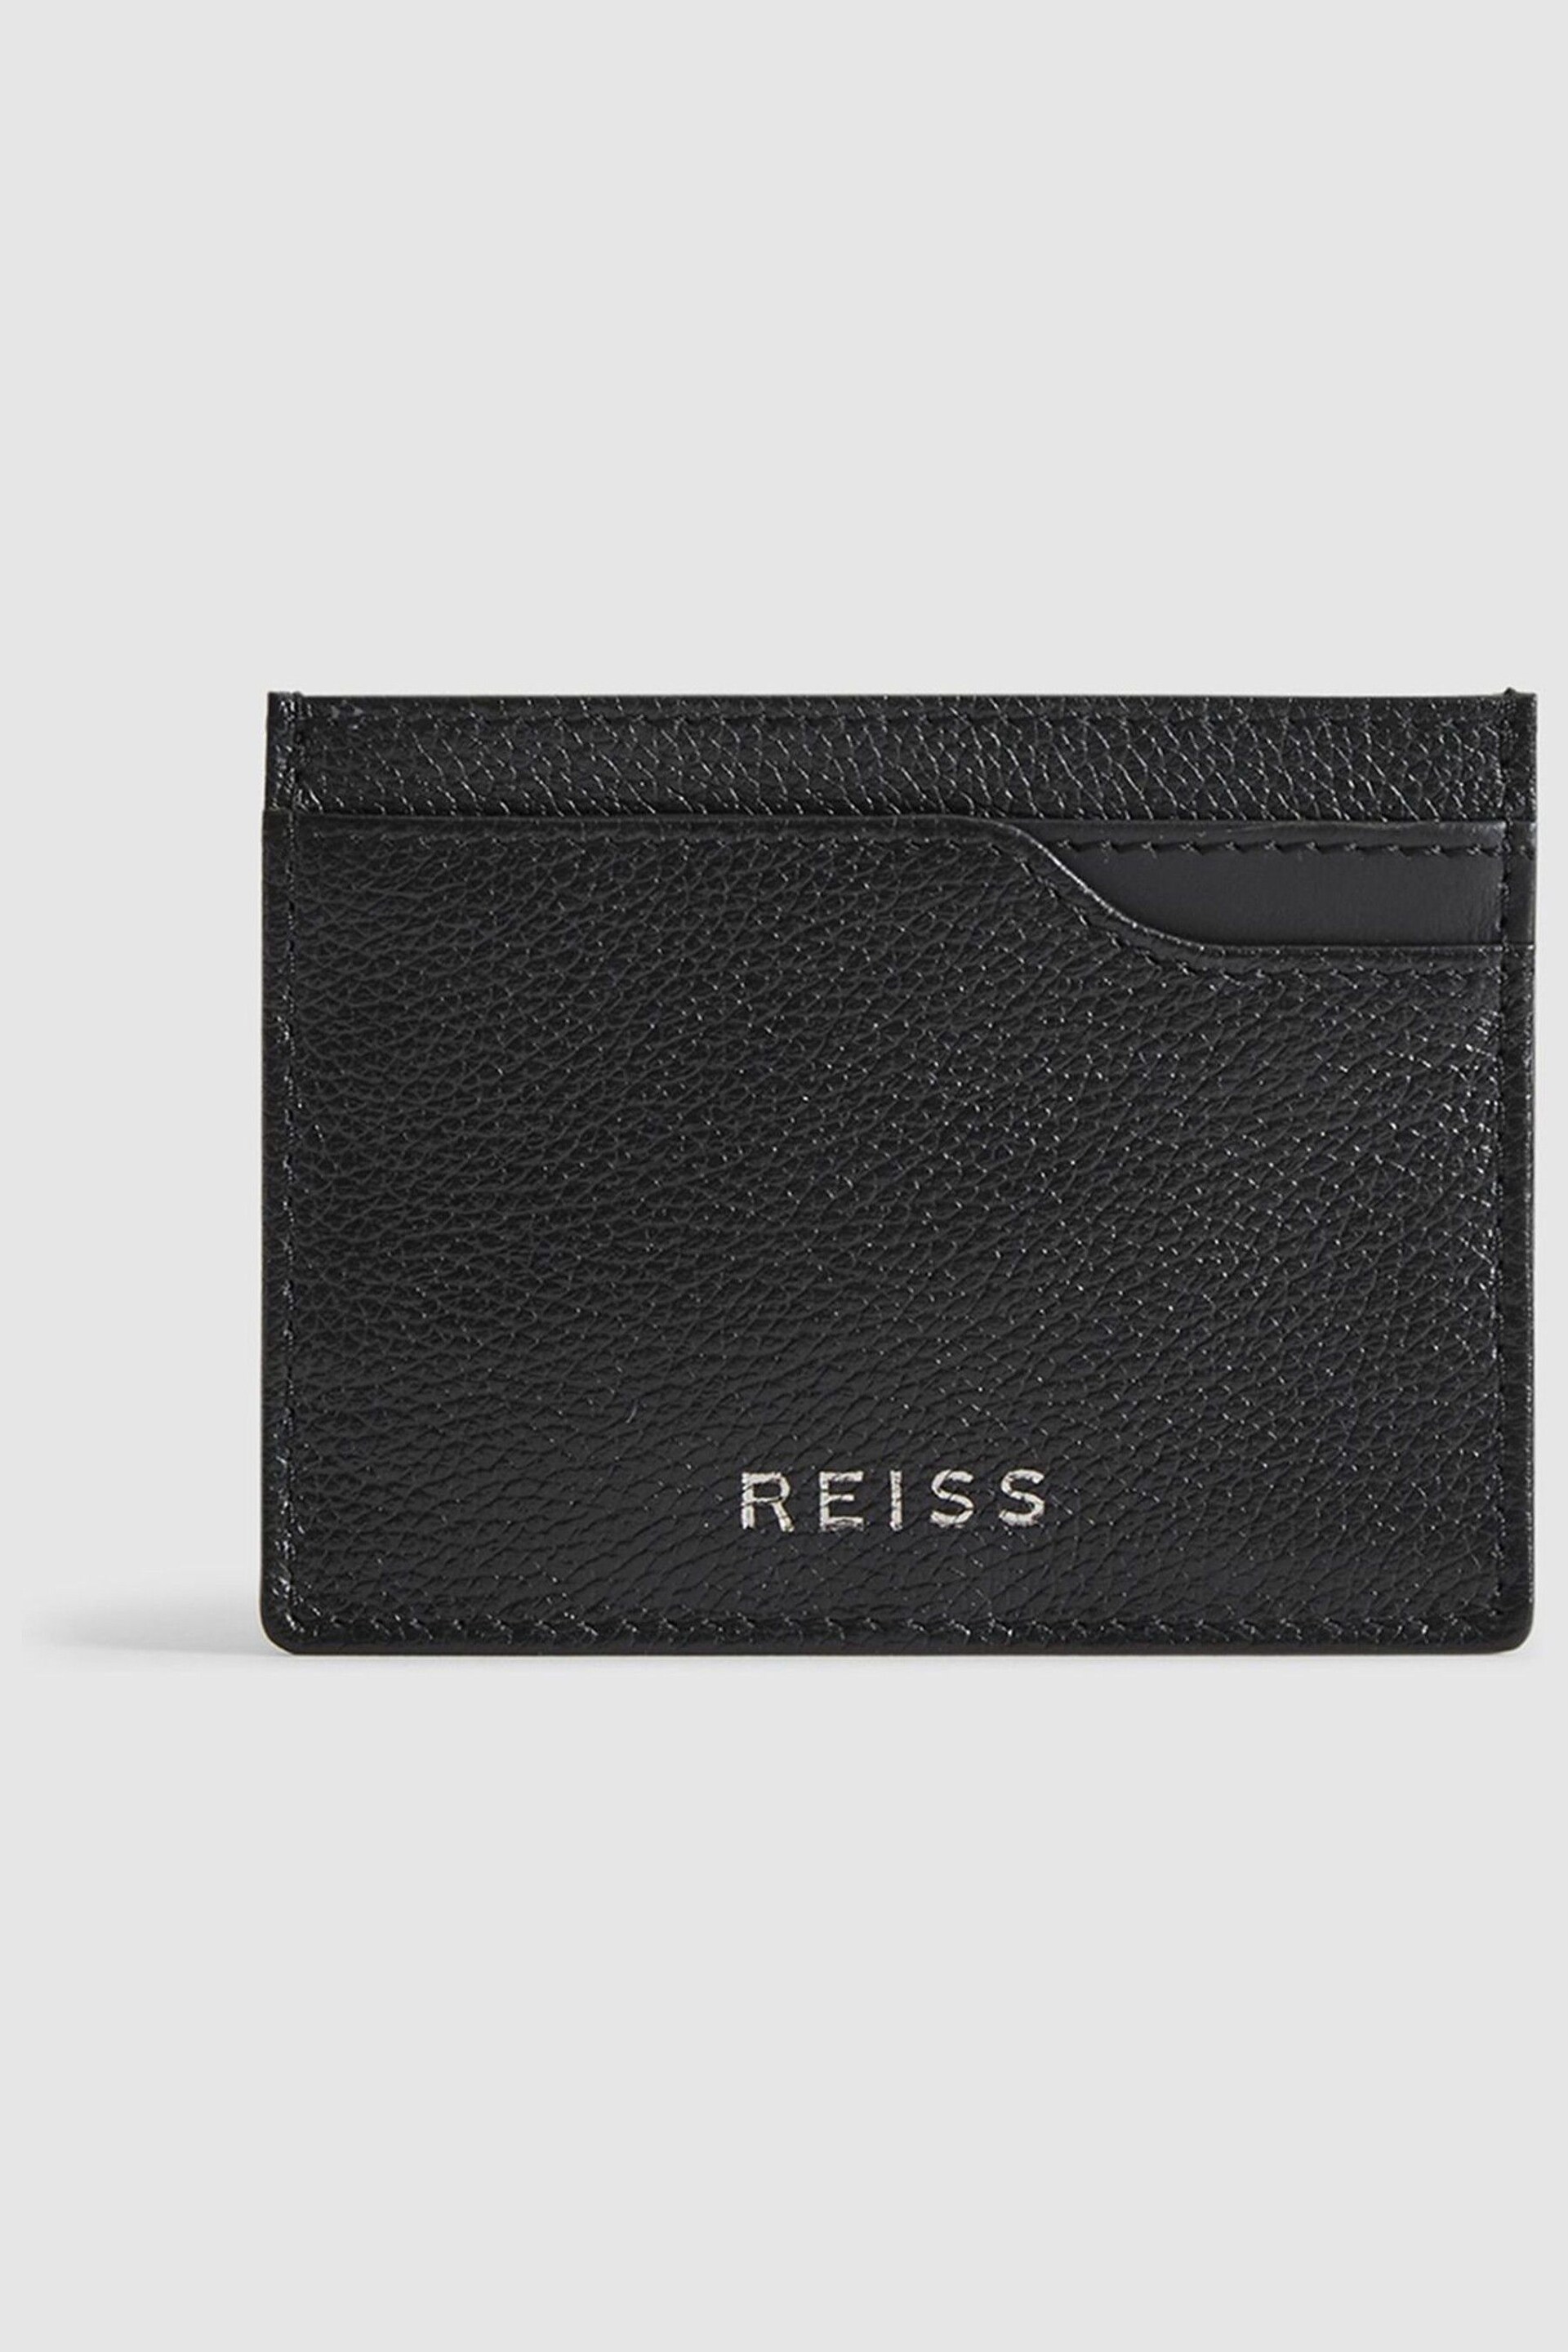 Reiss Black Cabot Leather Card Holder - Image 1 of 2